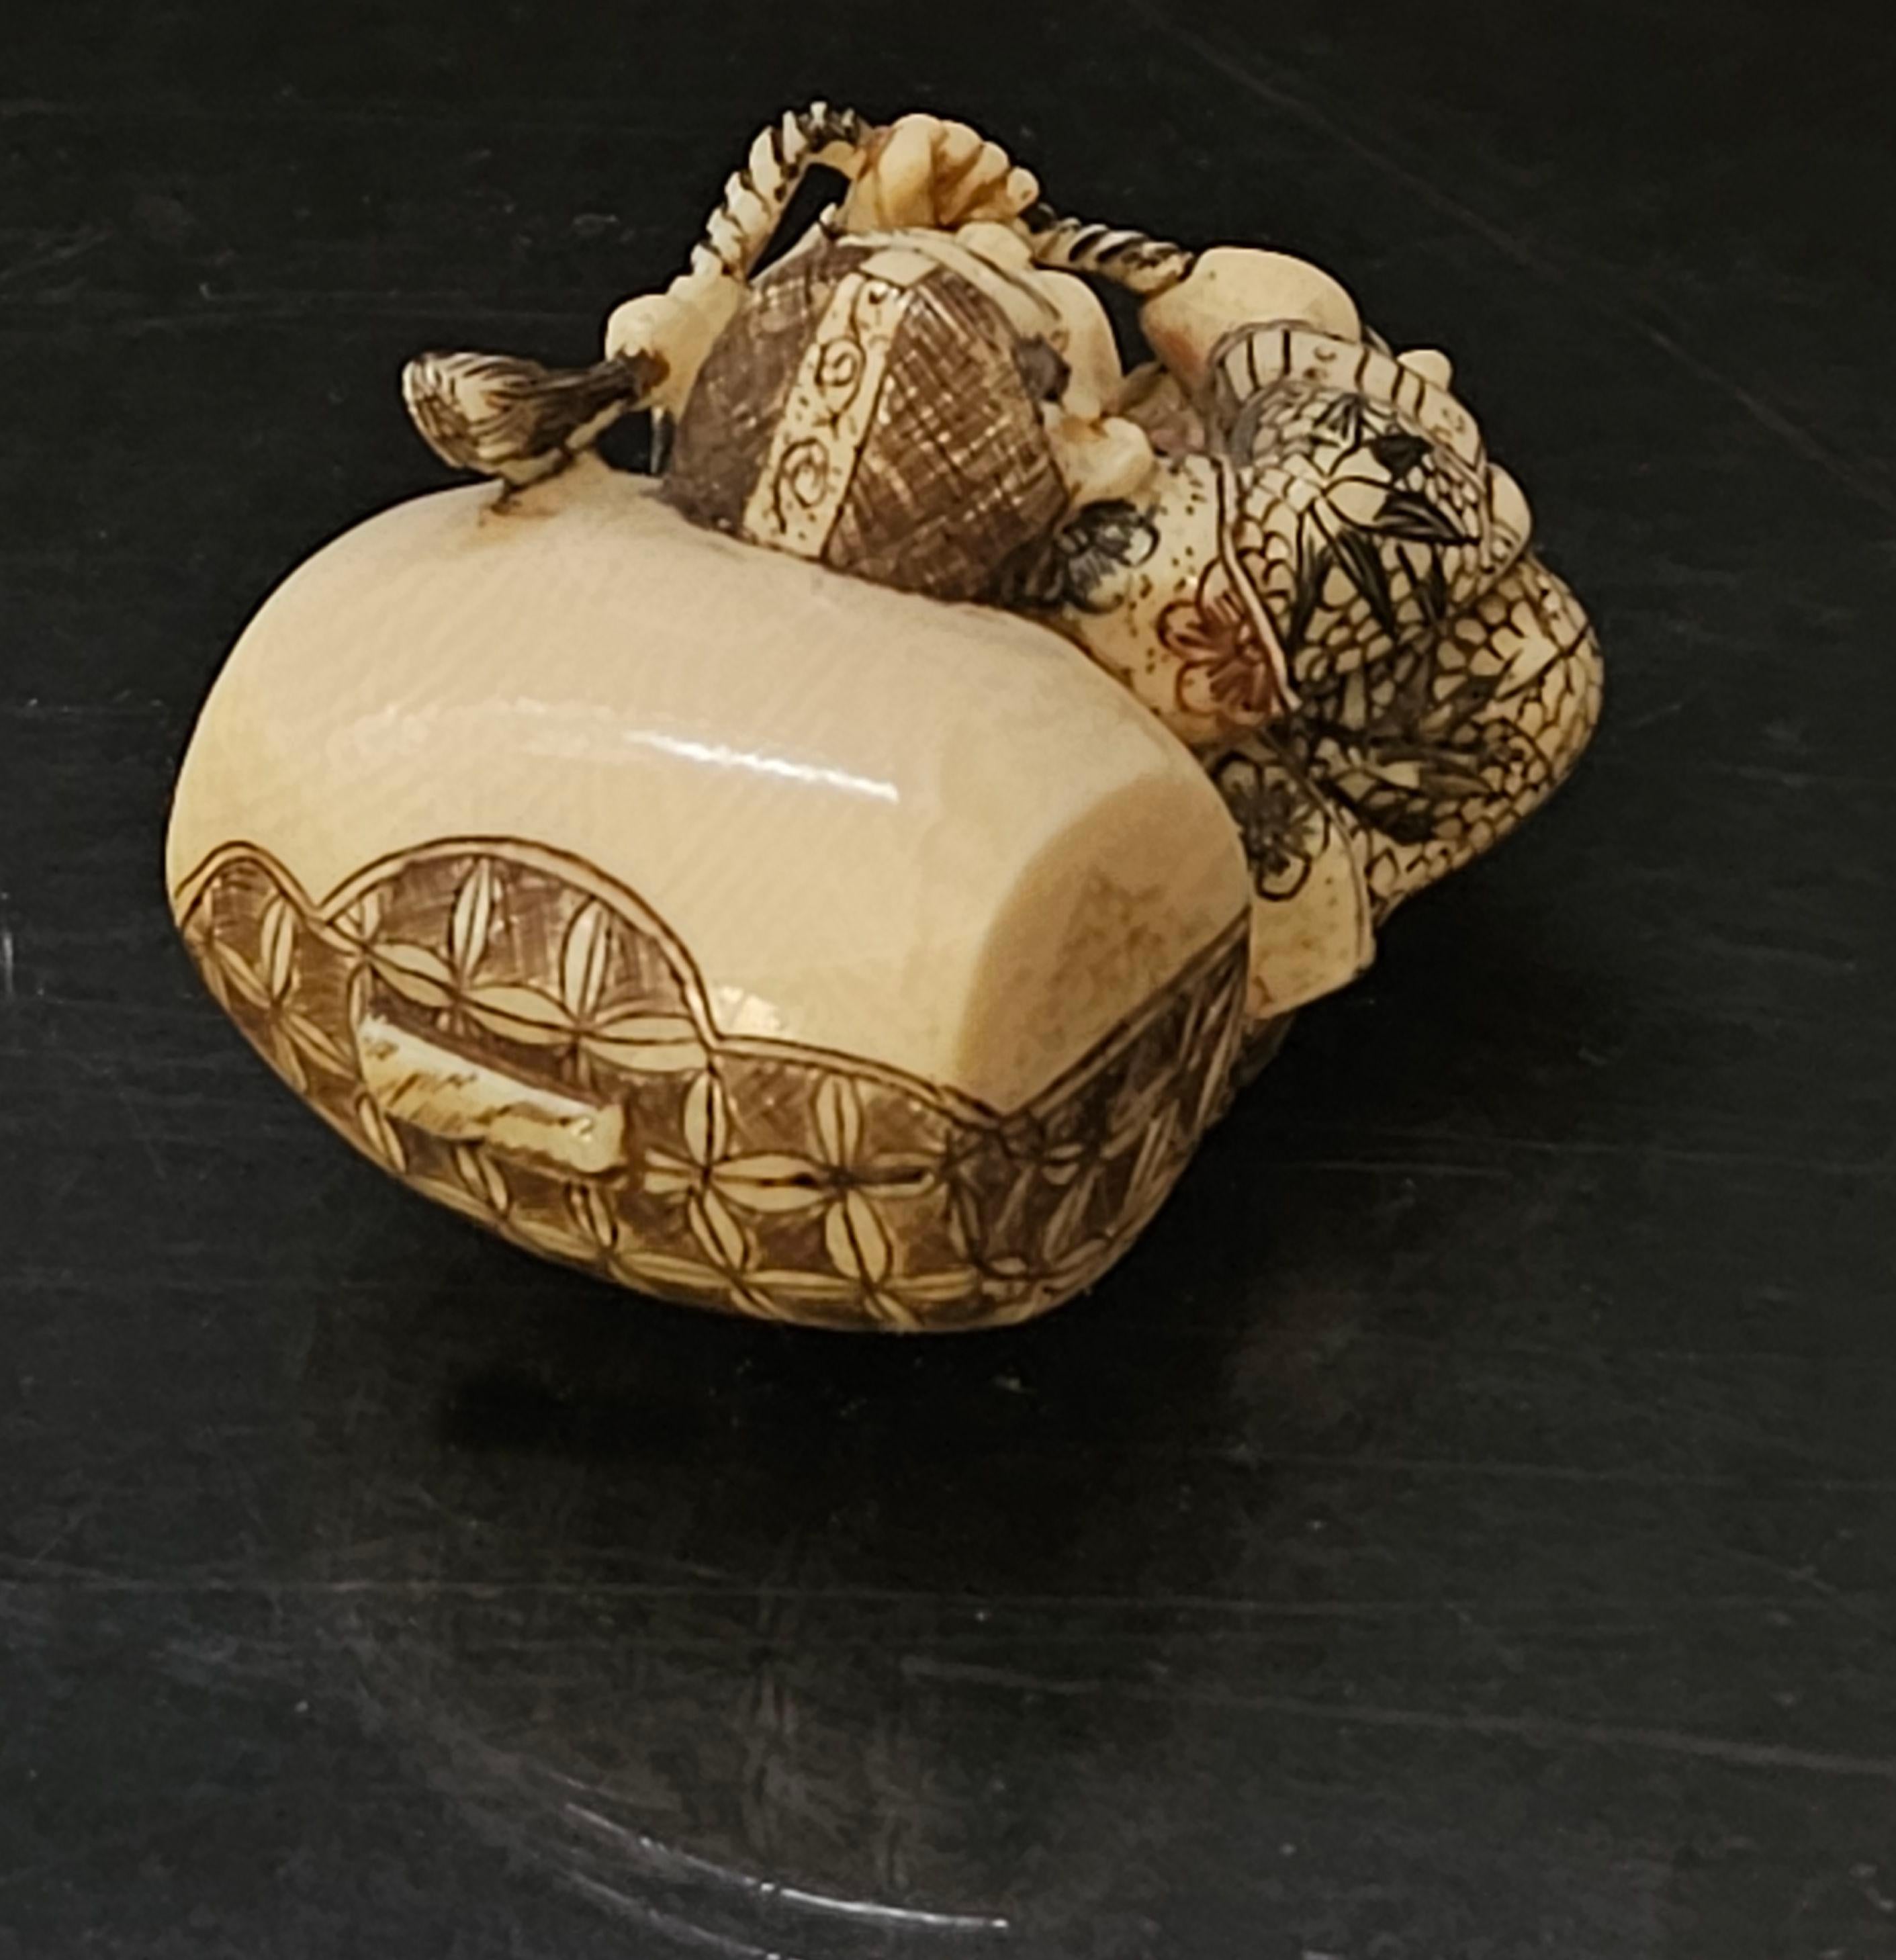 Japanese Carved Netsuke Polychrome Decorated Figur, Signed by Matsuyoshi, Meiji  In Excellent Condition For Sale In Norton, MA